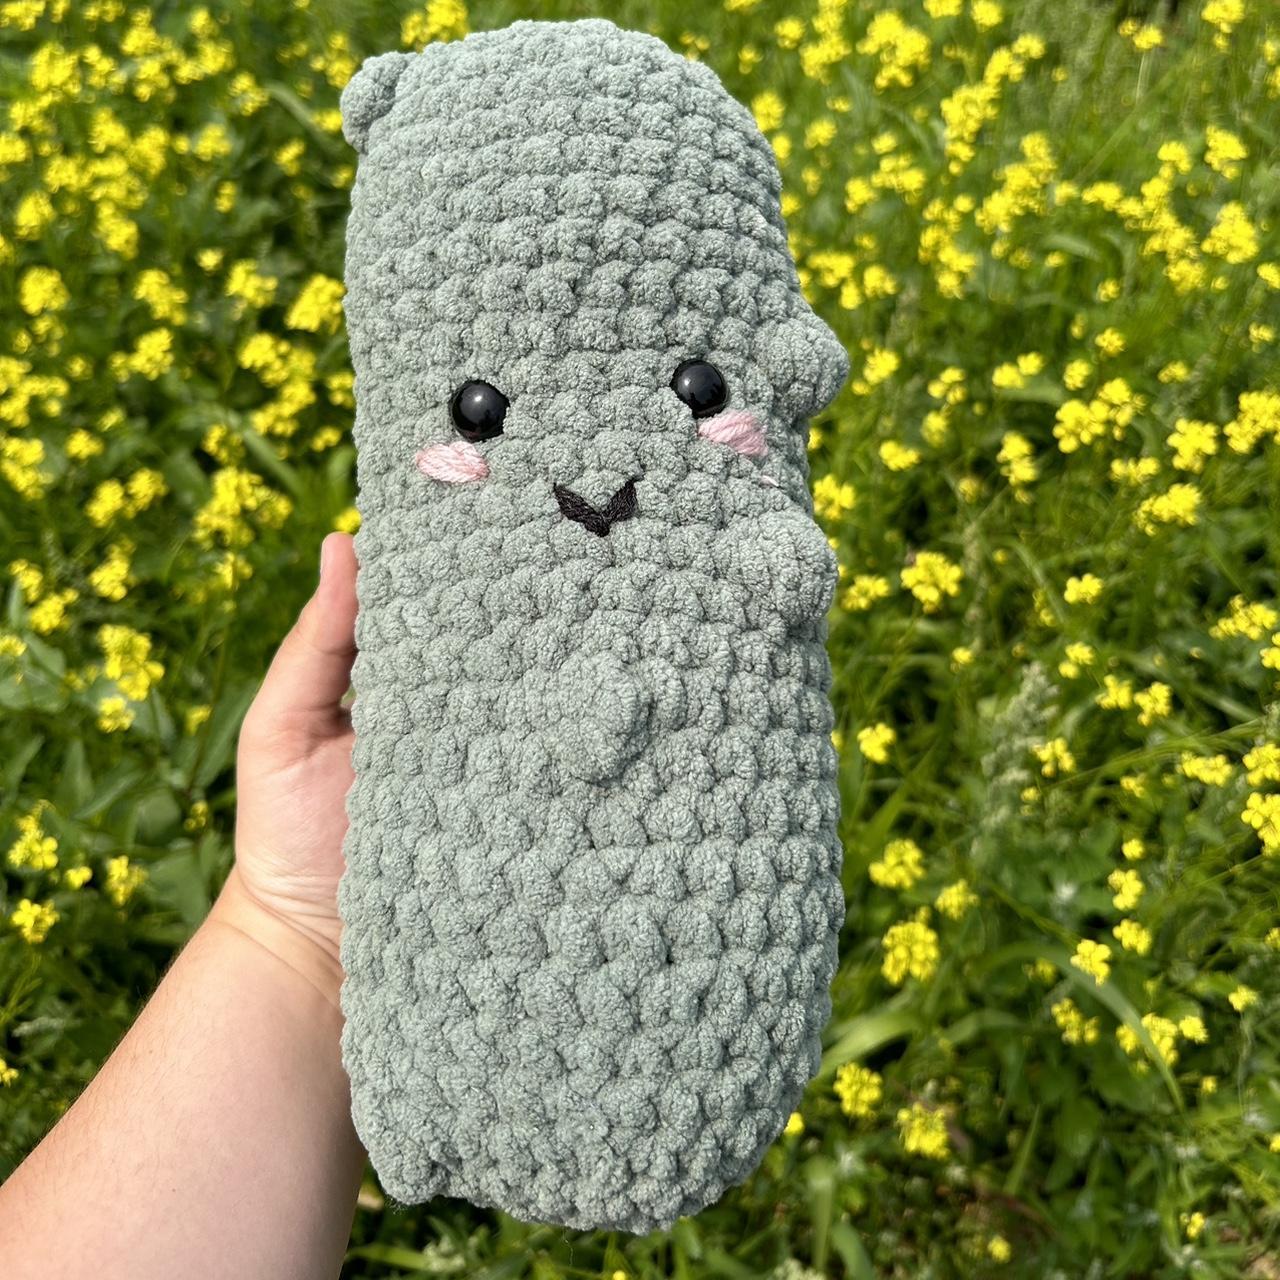 Crochet pickle Green 5-8 inches - Depop